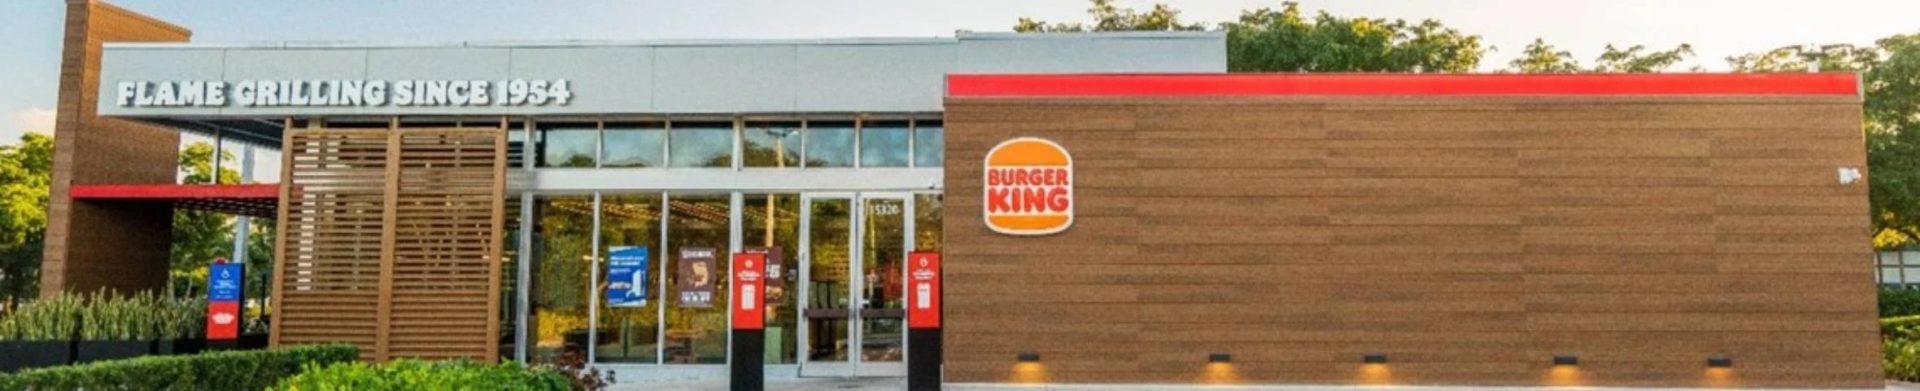 Burger King storefront in the daytime